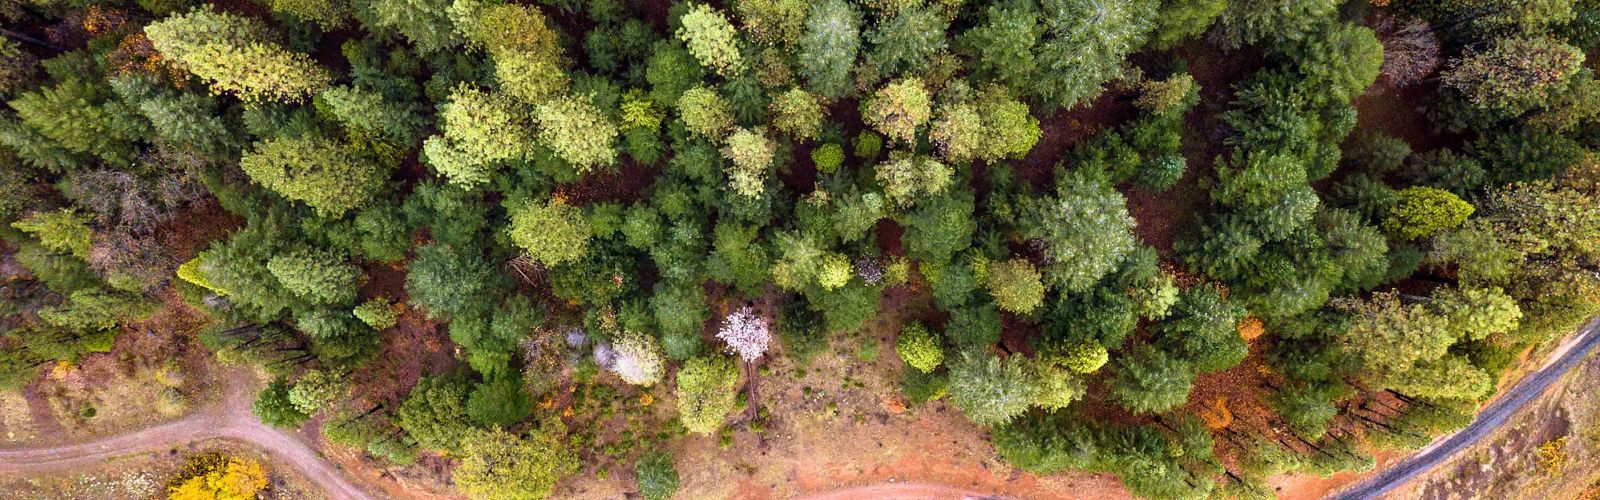 Aerial view of trees in a forest, a dirt road, and the water's edge.